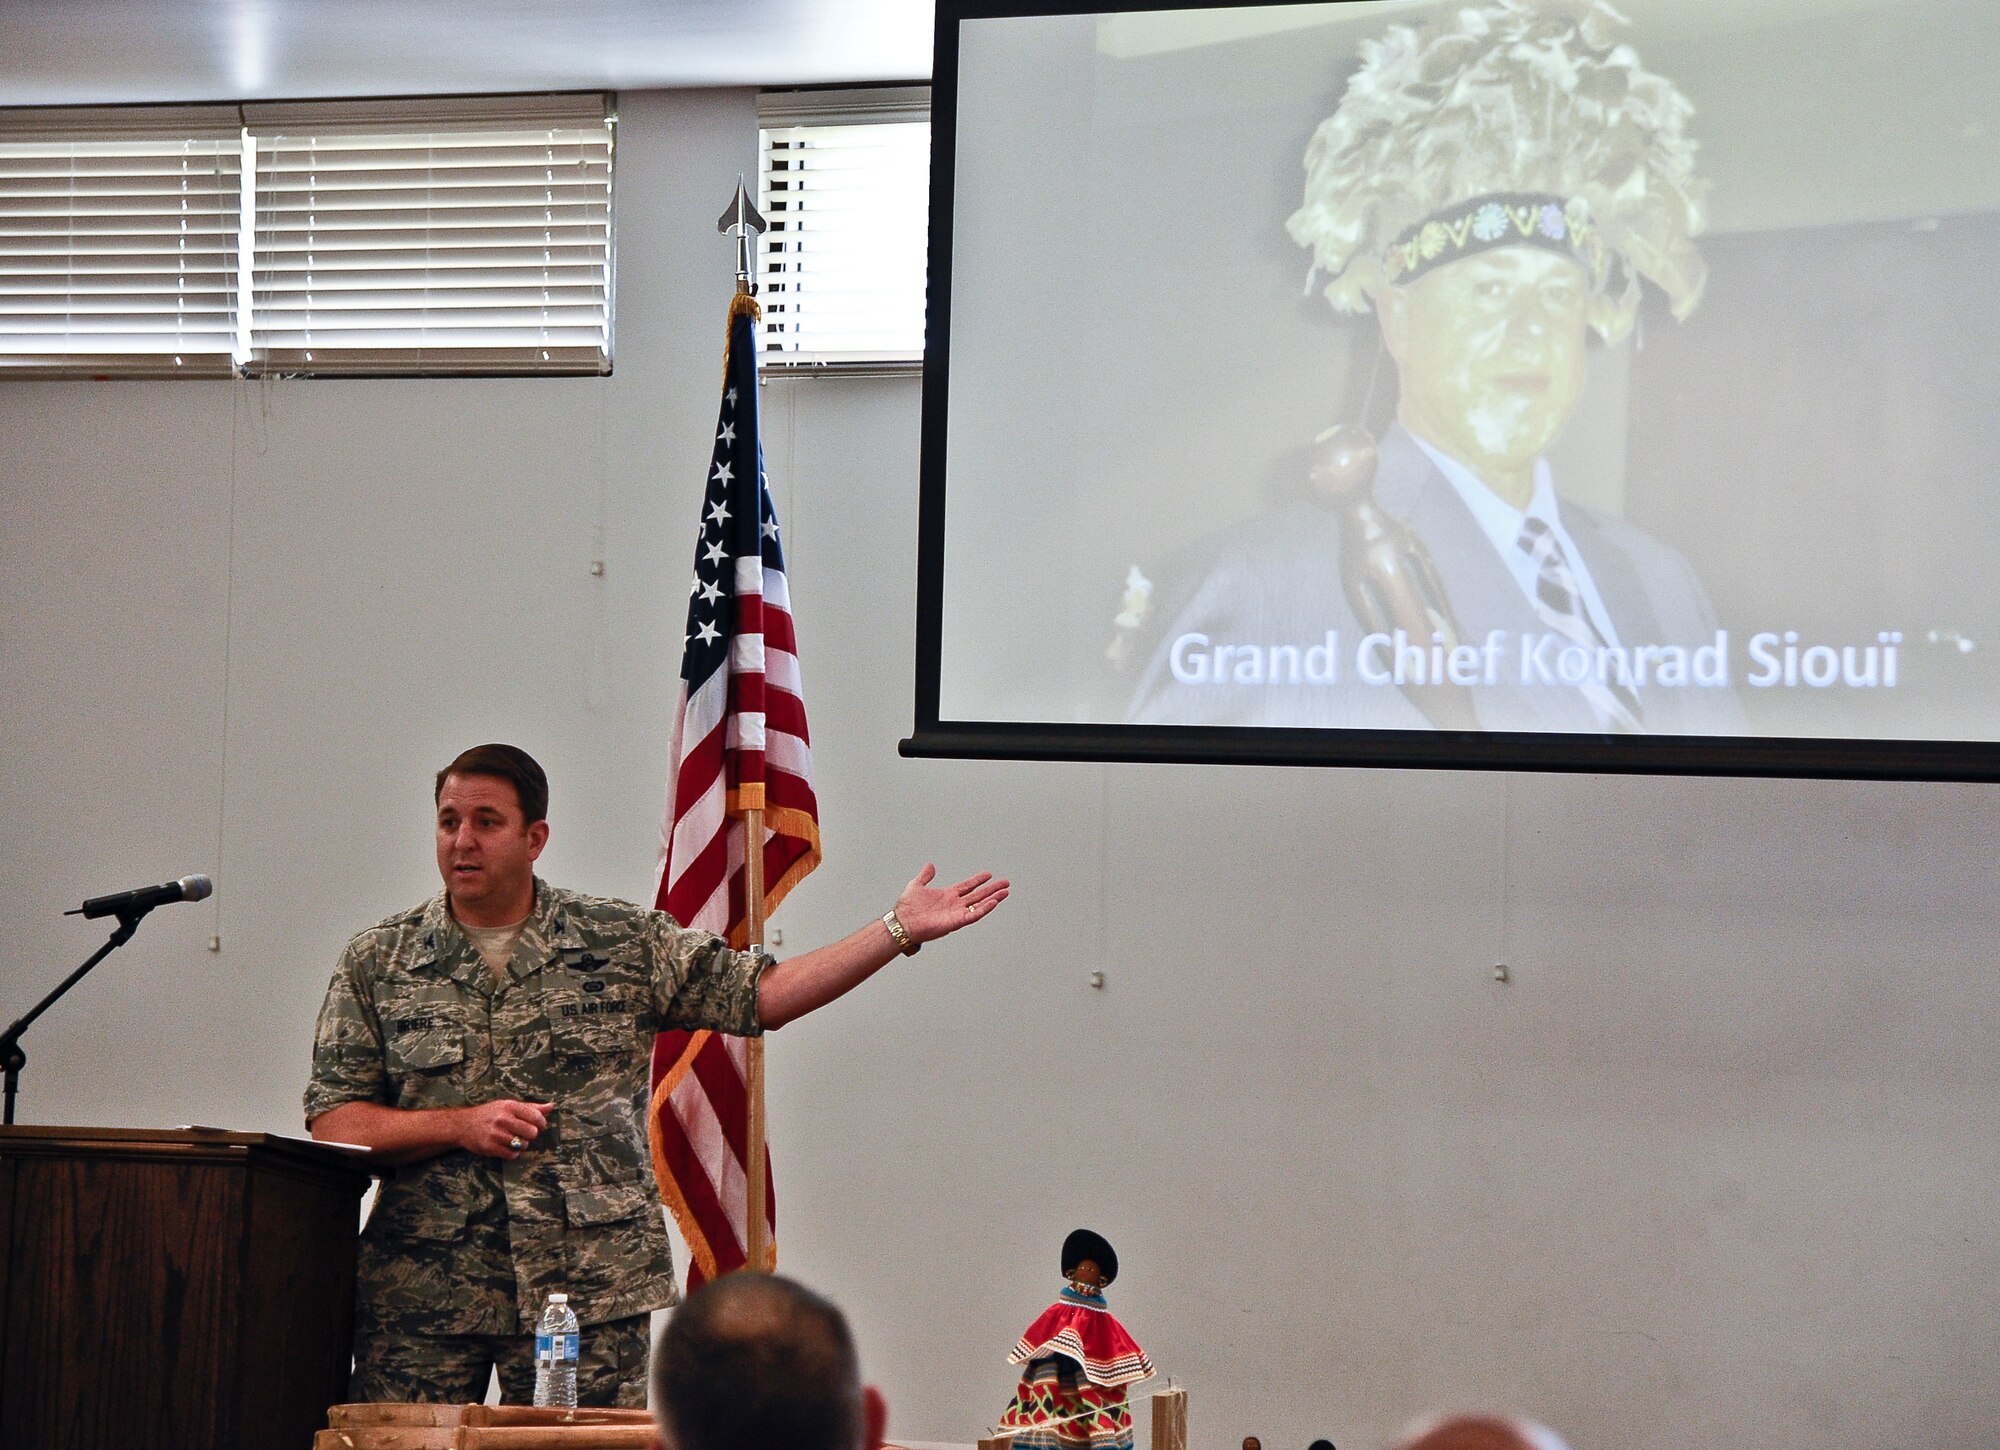 Col. Andre Briere, 6th Air Mobility Wing vice commander and descendent of the Huron-Wendat/Wendake, talks about his tribe's current clan leader, Grand Chief Konrad Sioui, during a National American Indian Heritage Month lunch and learn Nov. 13, 2013, at MacDill Air Force Base, Fla. Briere stated that Native Americans are one of the most stereotyped groups, and oftentimes many do not fit the profiles portrayed on television. (U.S. Air Force photo by Senior Airman Michael Ellis/Released)   
